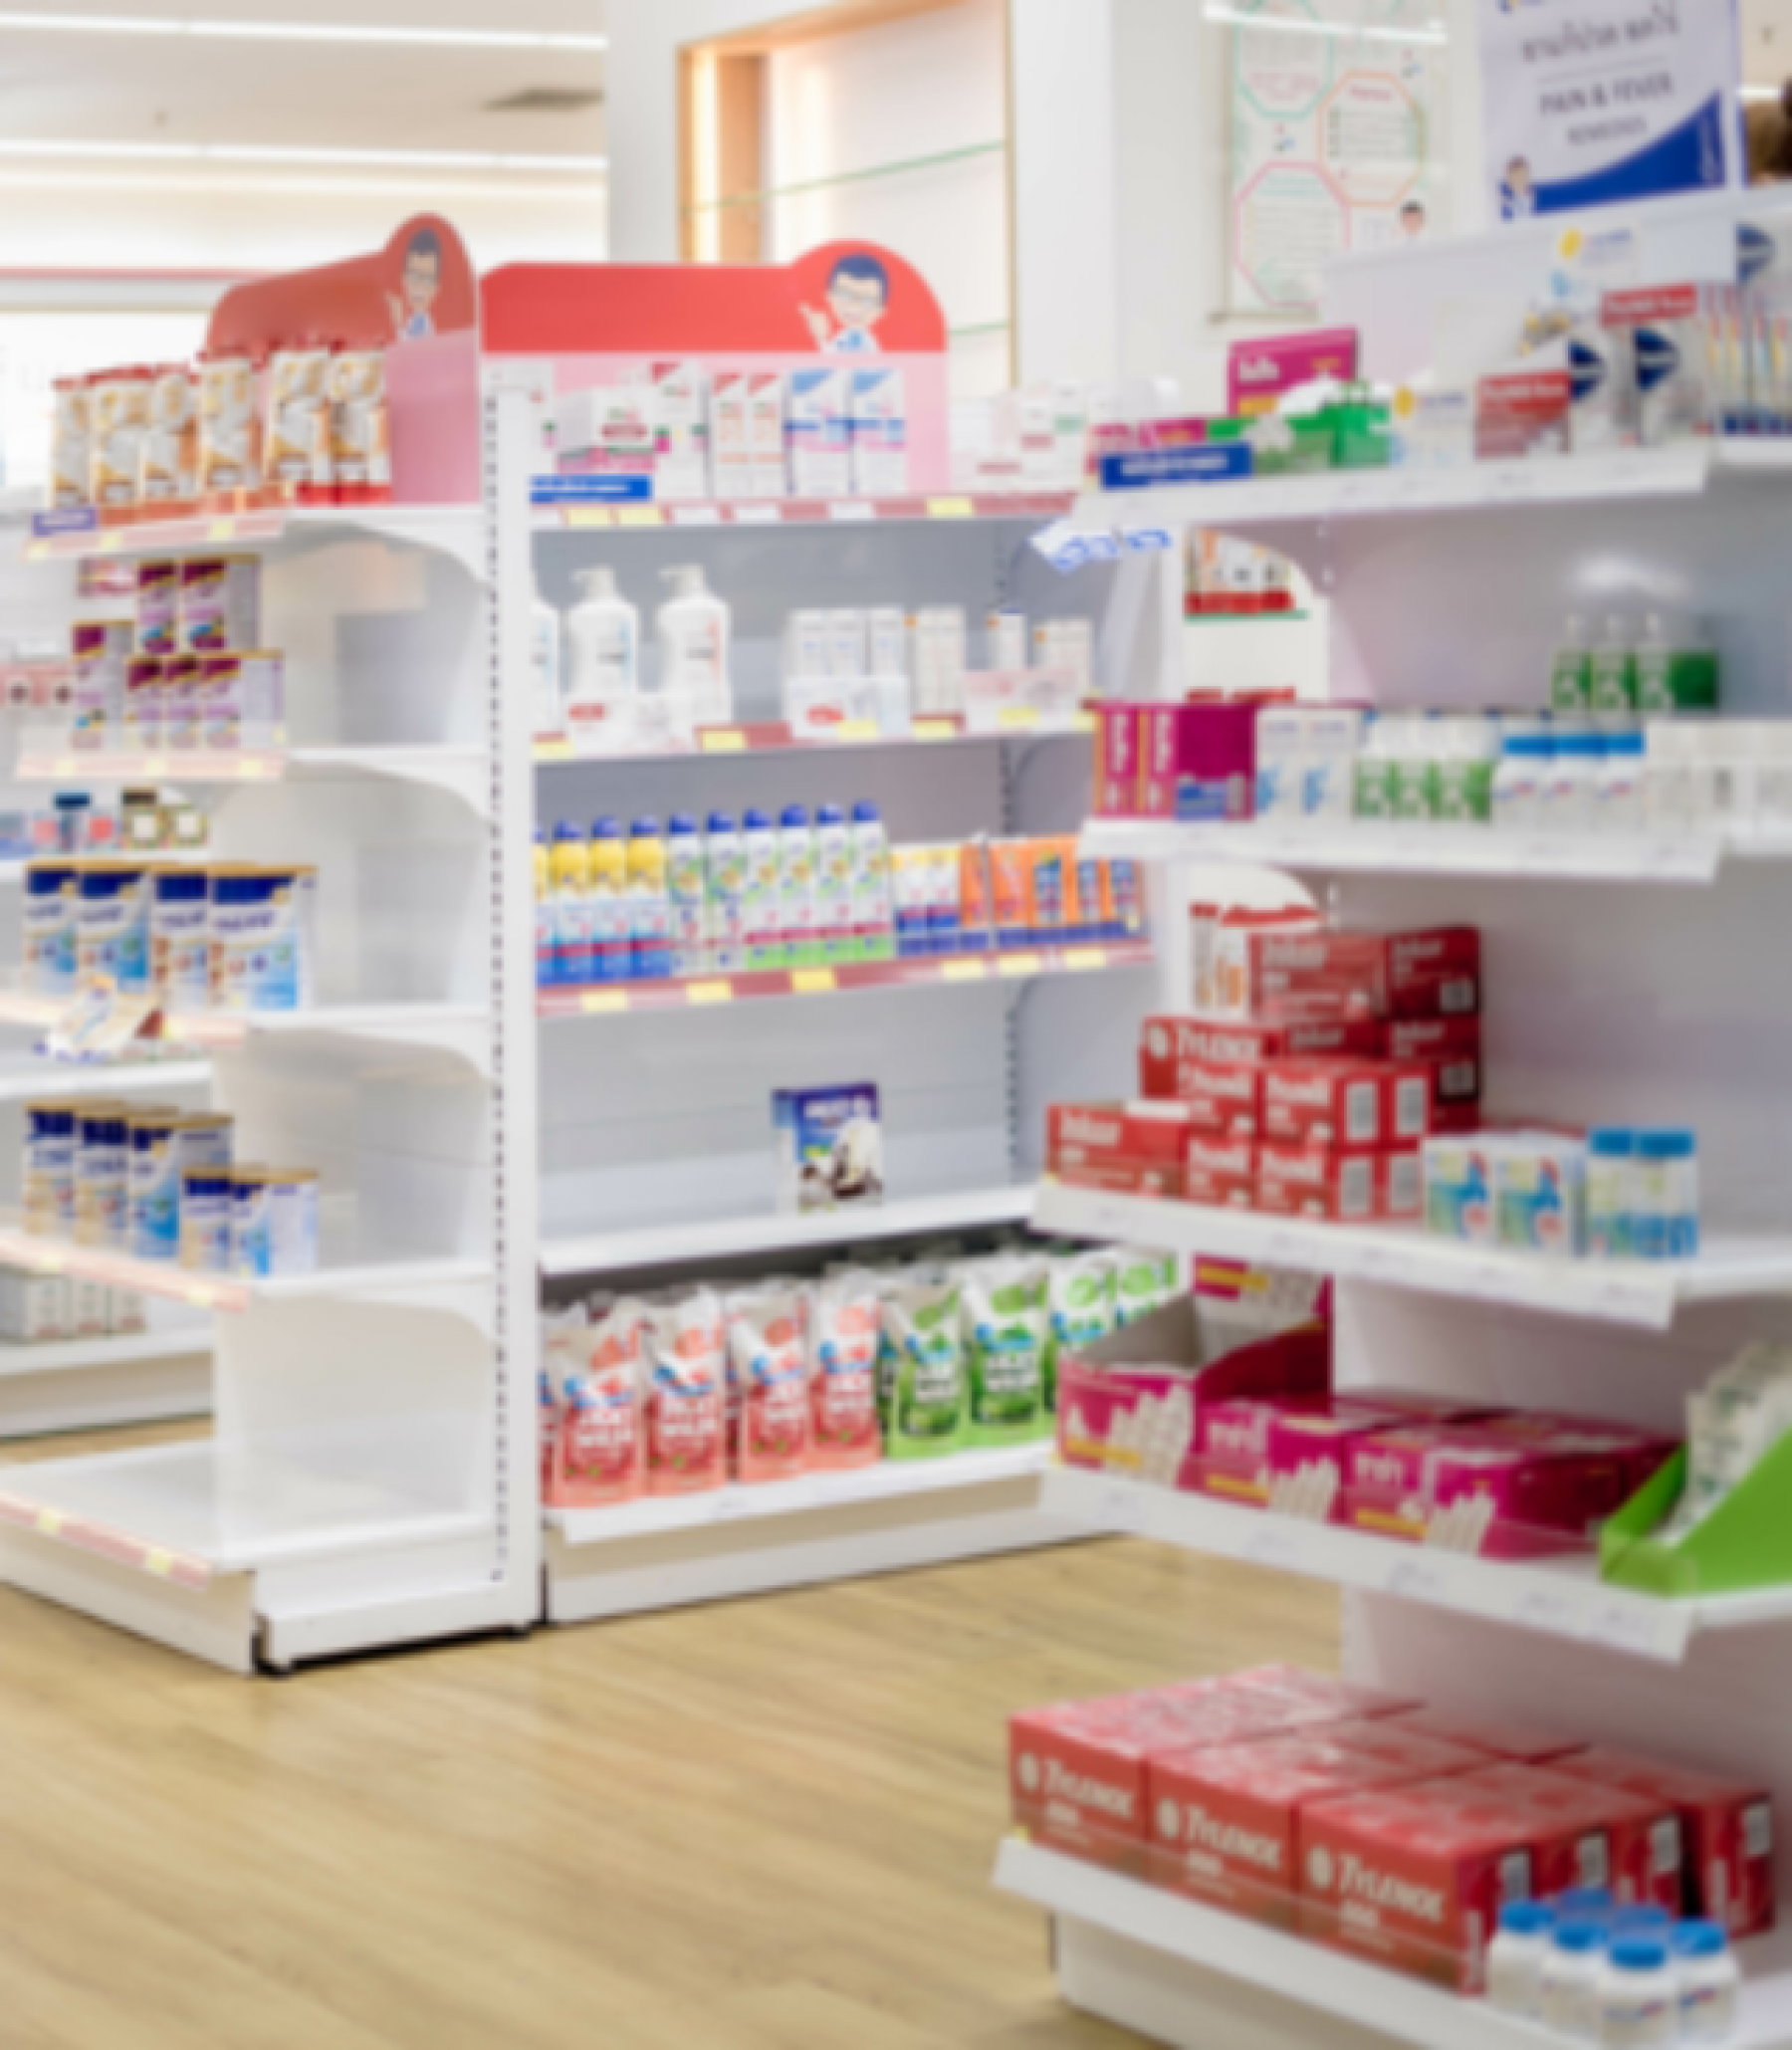 Drugstore shelves lined with over-the-counter medications.